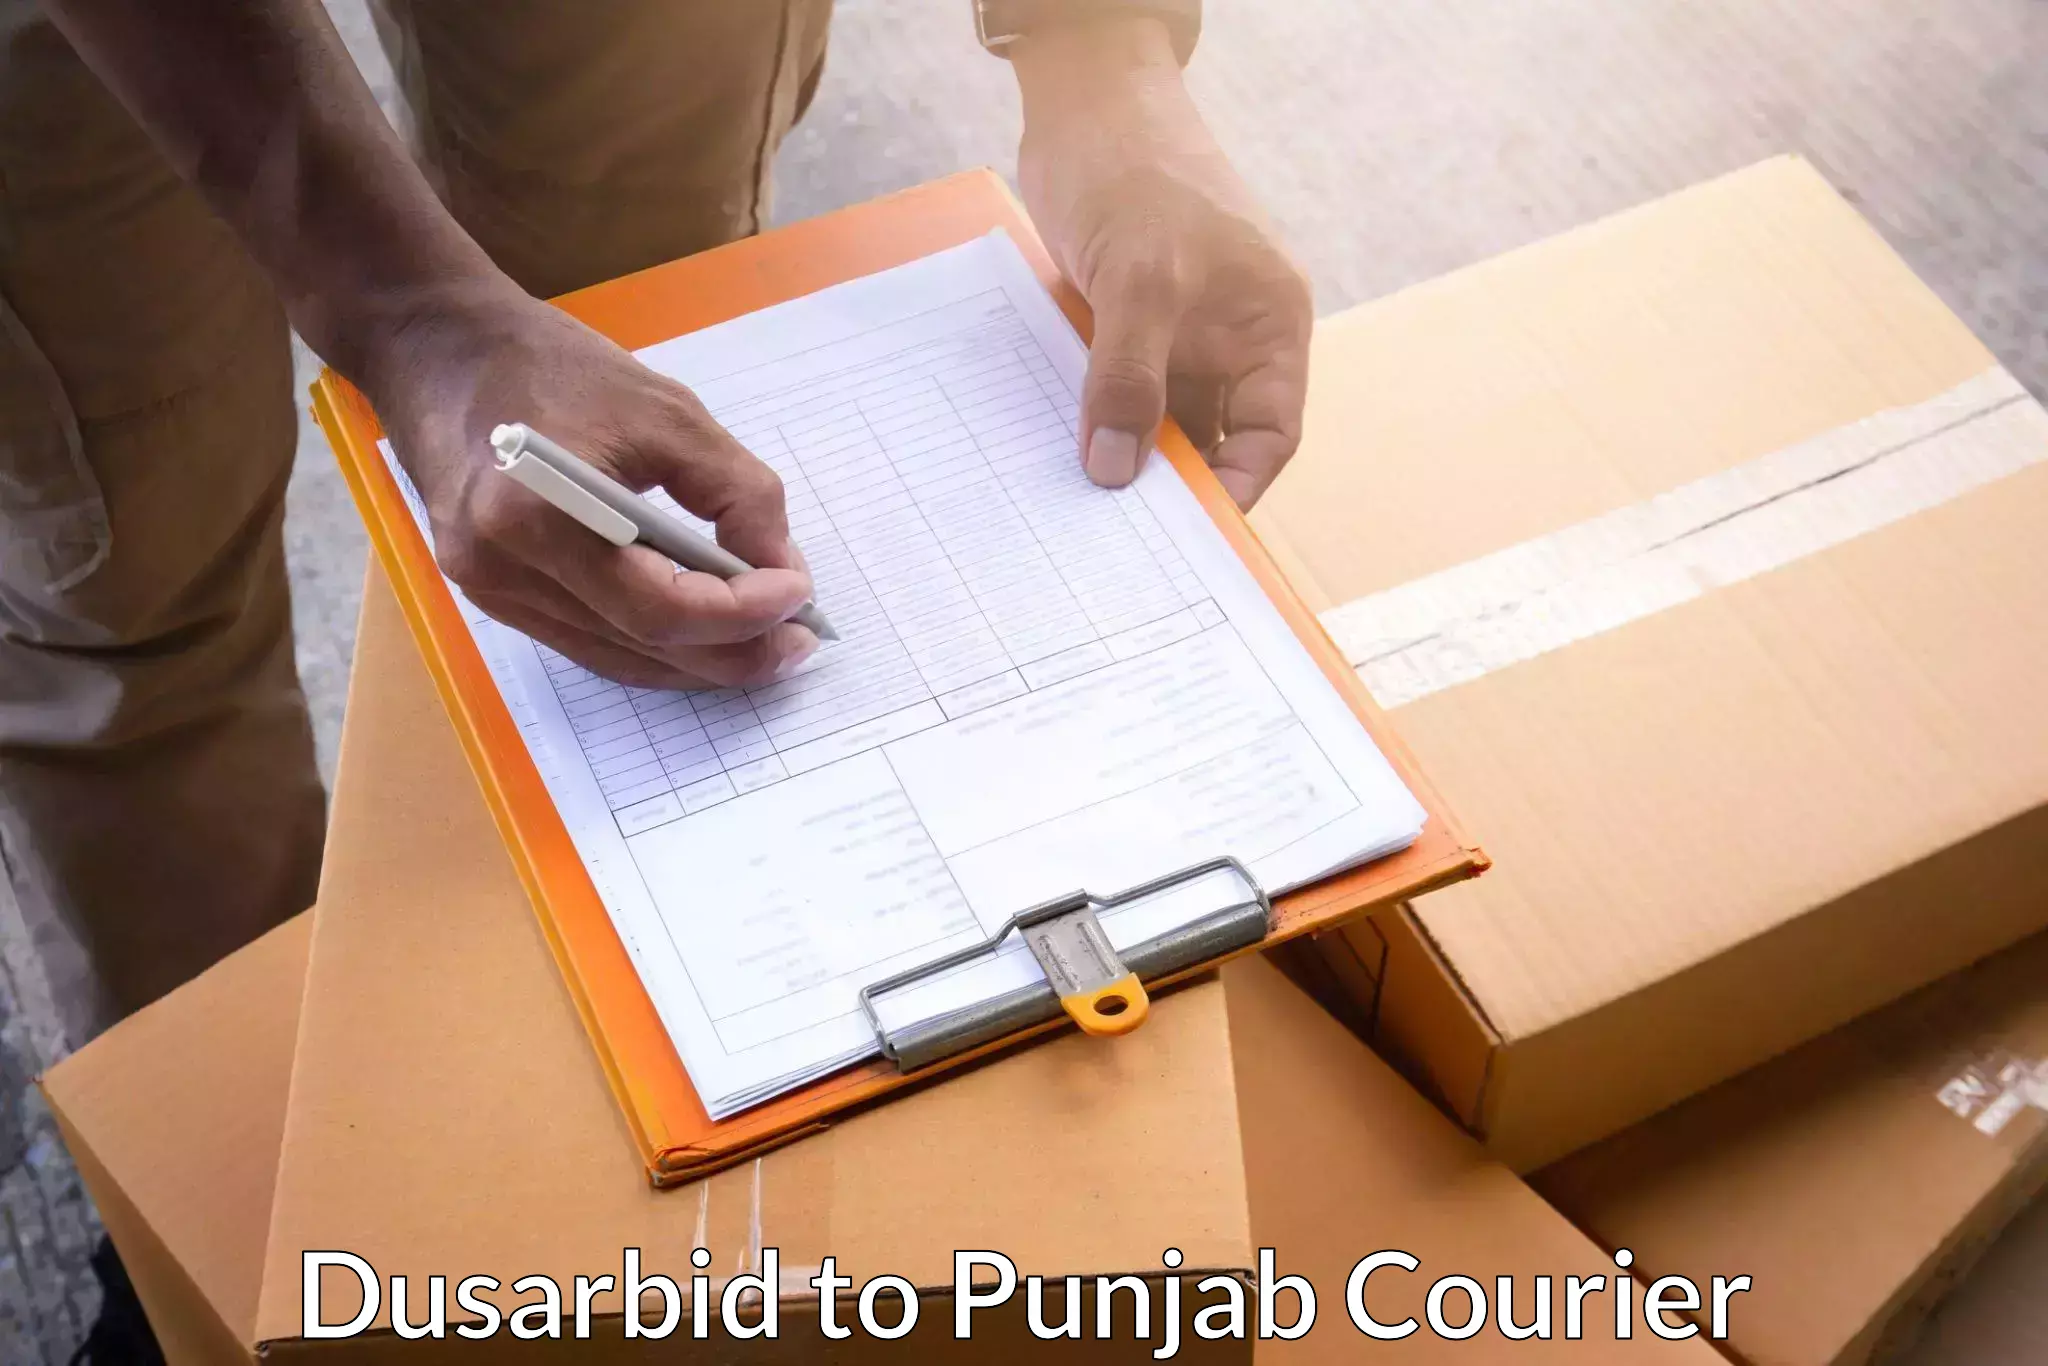 Easy access courier services in Dusarbid to Mandi Gobindgarh